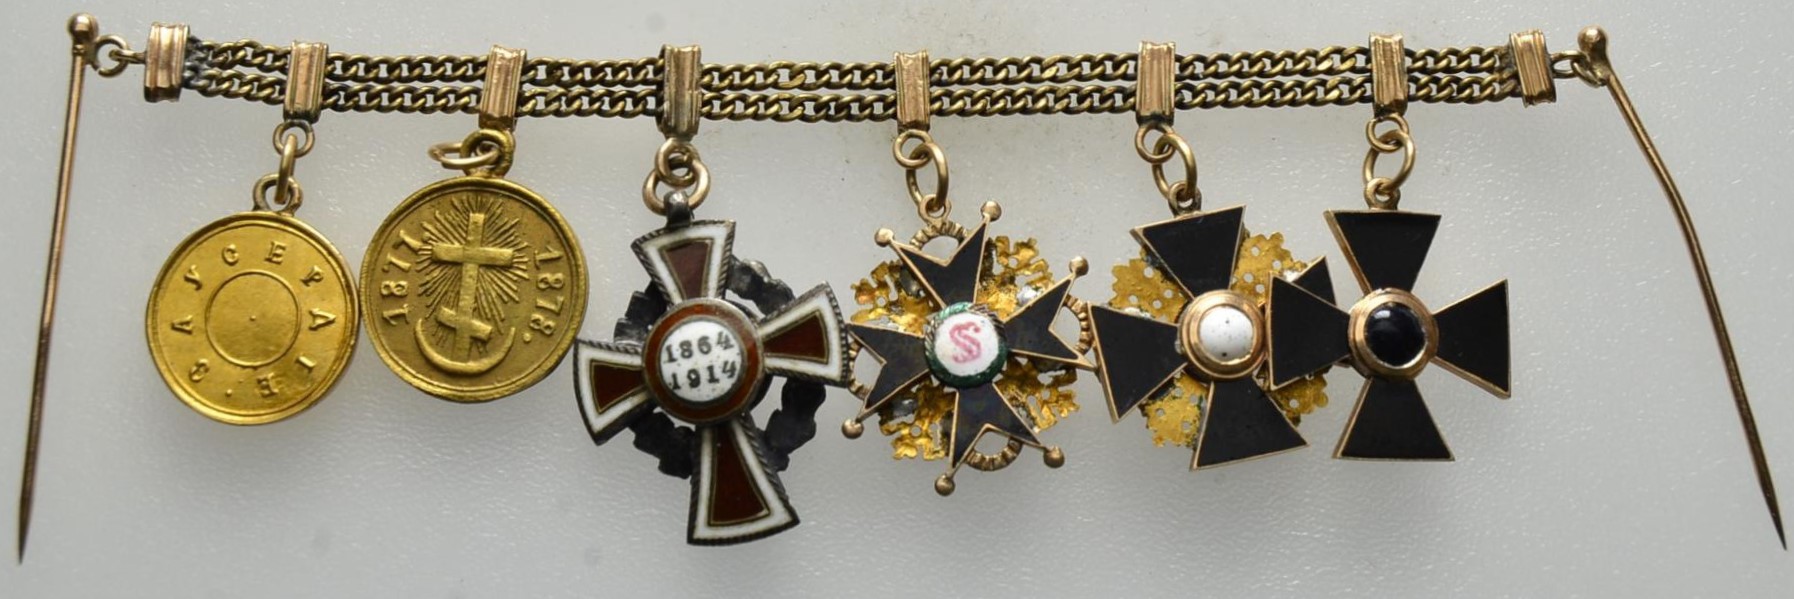 Miniature chain  with six miniatures of awards.jpg